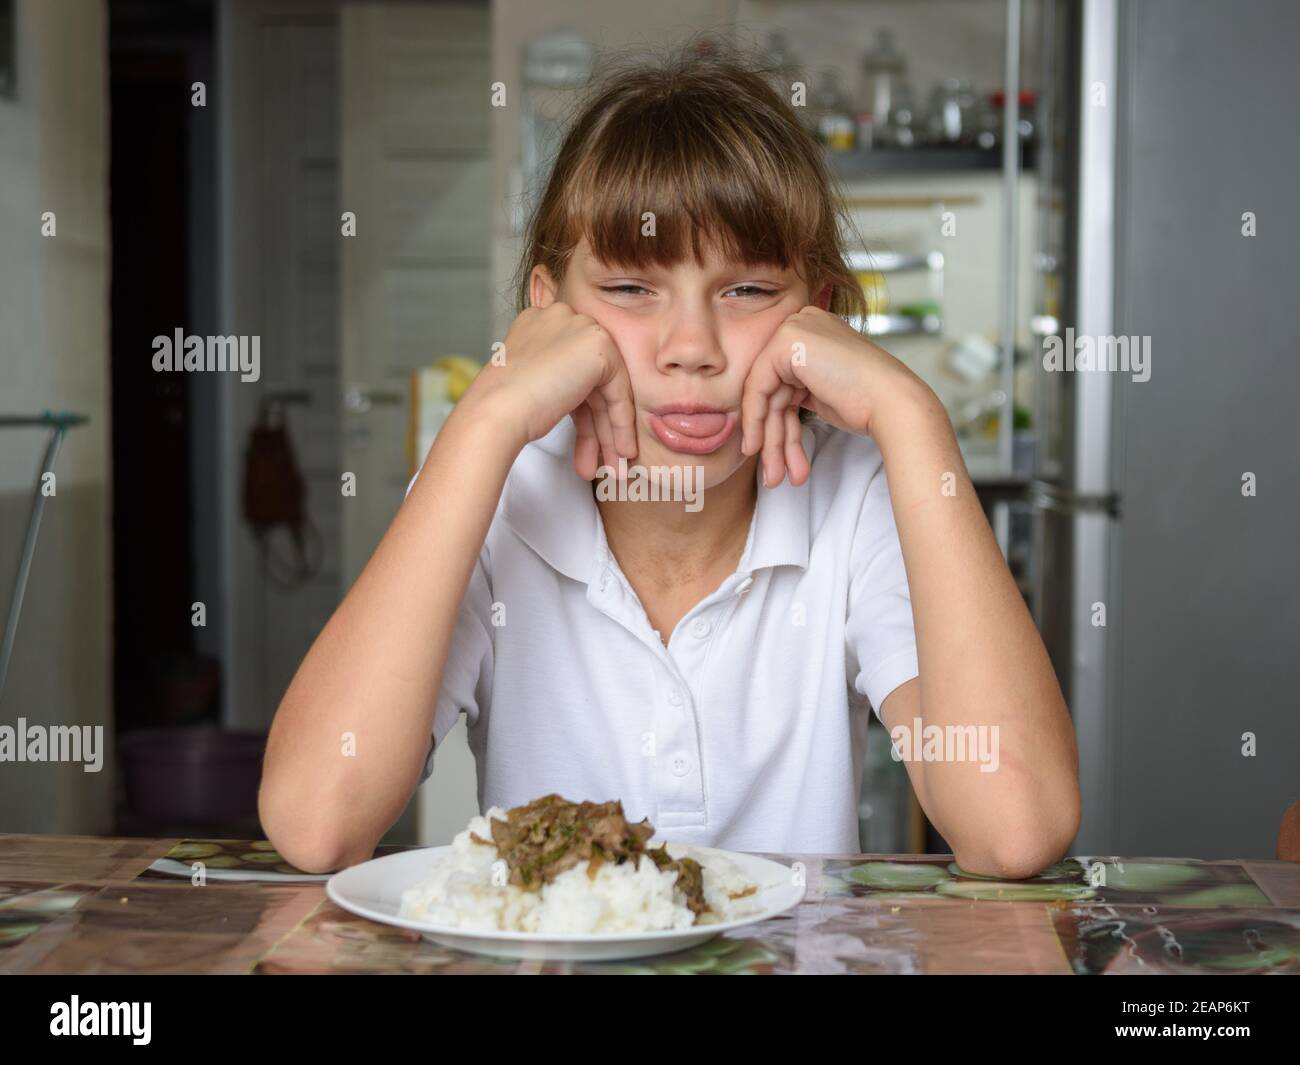 The girl refuses the food offered and shows her tongue Stock Photo